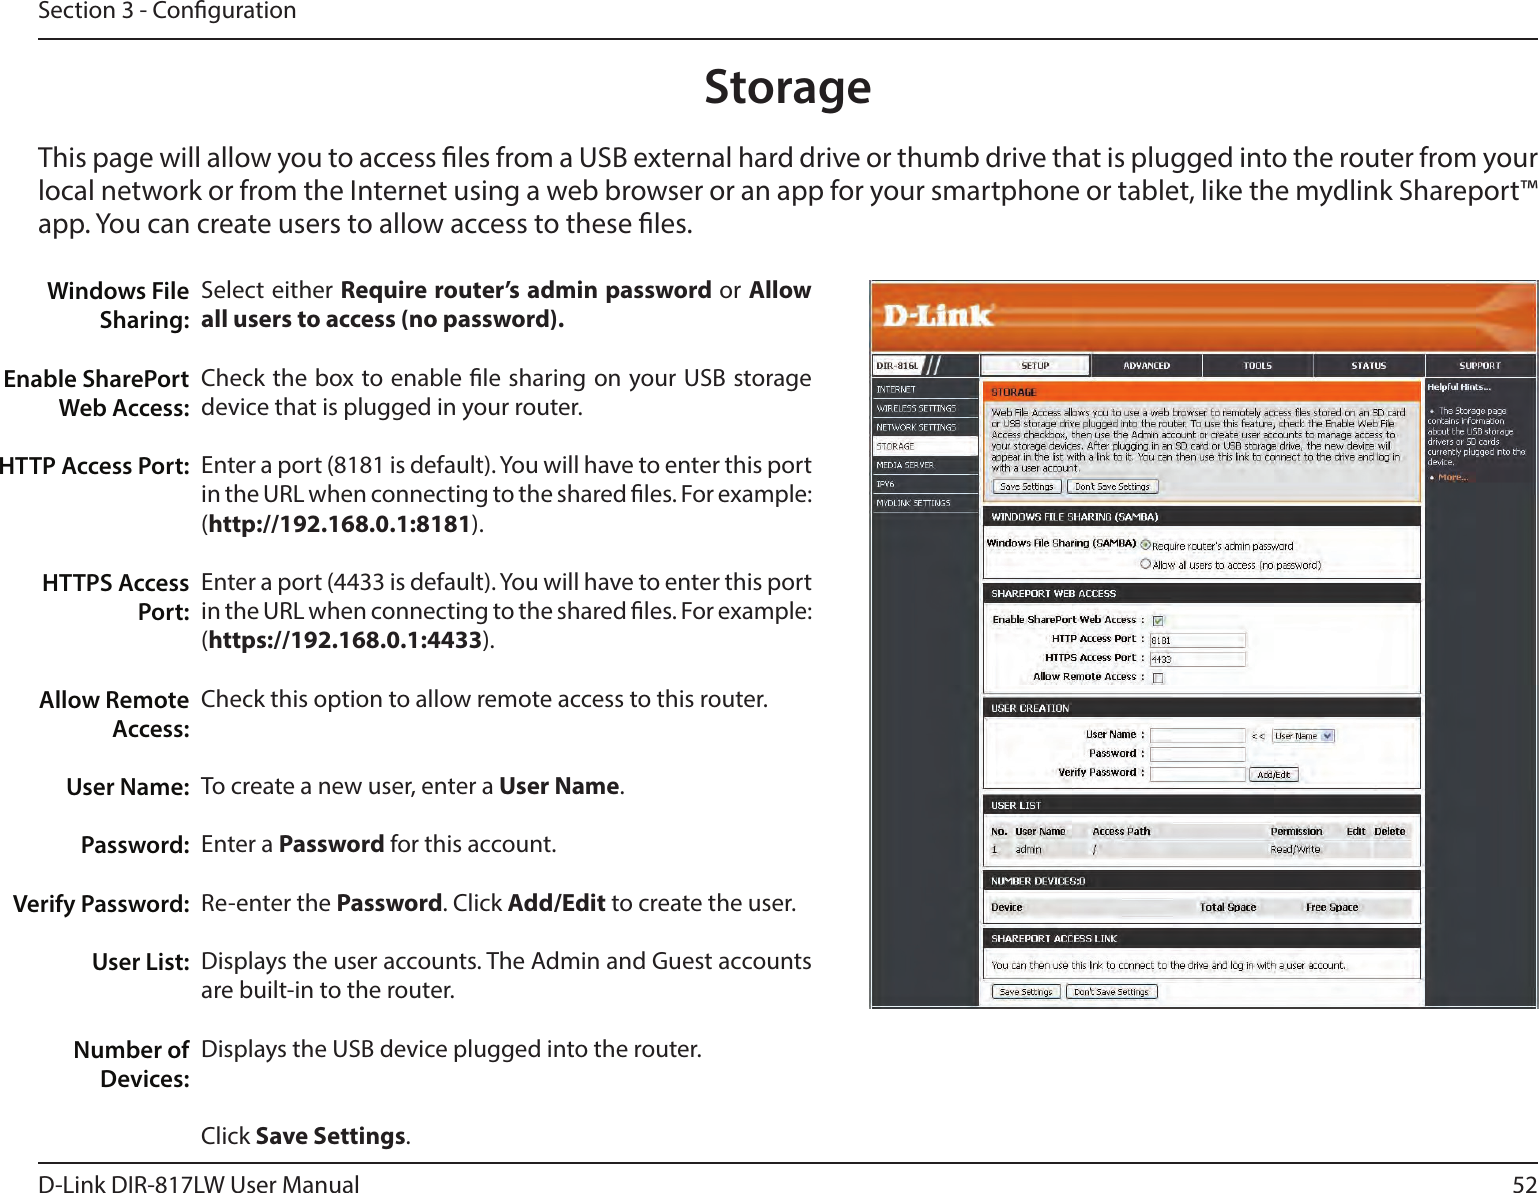 52D-Link DIR-817LW User ManualSection 3 - CongurationStorageThis page will allow you to access les from a USB external hard drive or thumb drive that is plugged into the router from your local network or from the Internet using a web browser or an app for your smartphone or tablet, like the mydlink Shareport™ app. You can create users to allow access to these les.Select either Require router’s admin password or Allow all users to access (no password).Check the box to enable le sharing on your USB storage device that is plugged in your router.Enter a port (8181 is default). You will have to enter this port in the URL when connecting to the shared les. For example: (http://192.168.0.1:8181).Enter a port (4433 is default). You will have to enter this port in the URL when connecting to the shared les. For example: (https://192.168.0.1:4433).Check this option to allow remote access to this router.To create a new user, enter a User Name.Enter a Password for this account.Re-enter the Password. Click Add/Edit to create the user.Displays the user accounts. The Admin and Guest accounts are built-in to the router.Displays the USB device plugged into the router.Click Save Settings.Windows File Sharing:Enable SharePort Web Access:HTTP Access Port:HTTPS Access Port:Allow Remote Access:User Name:Password:Verify Password:User List:Number of Devices: